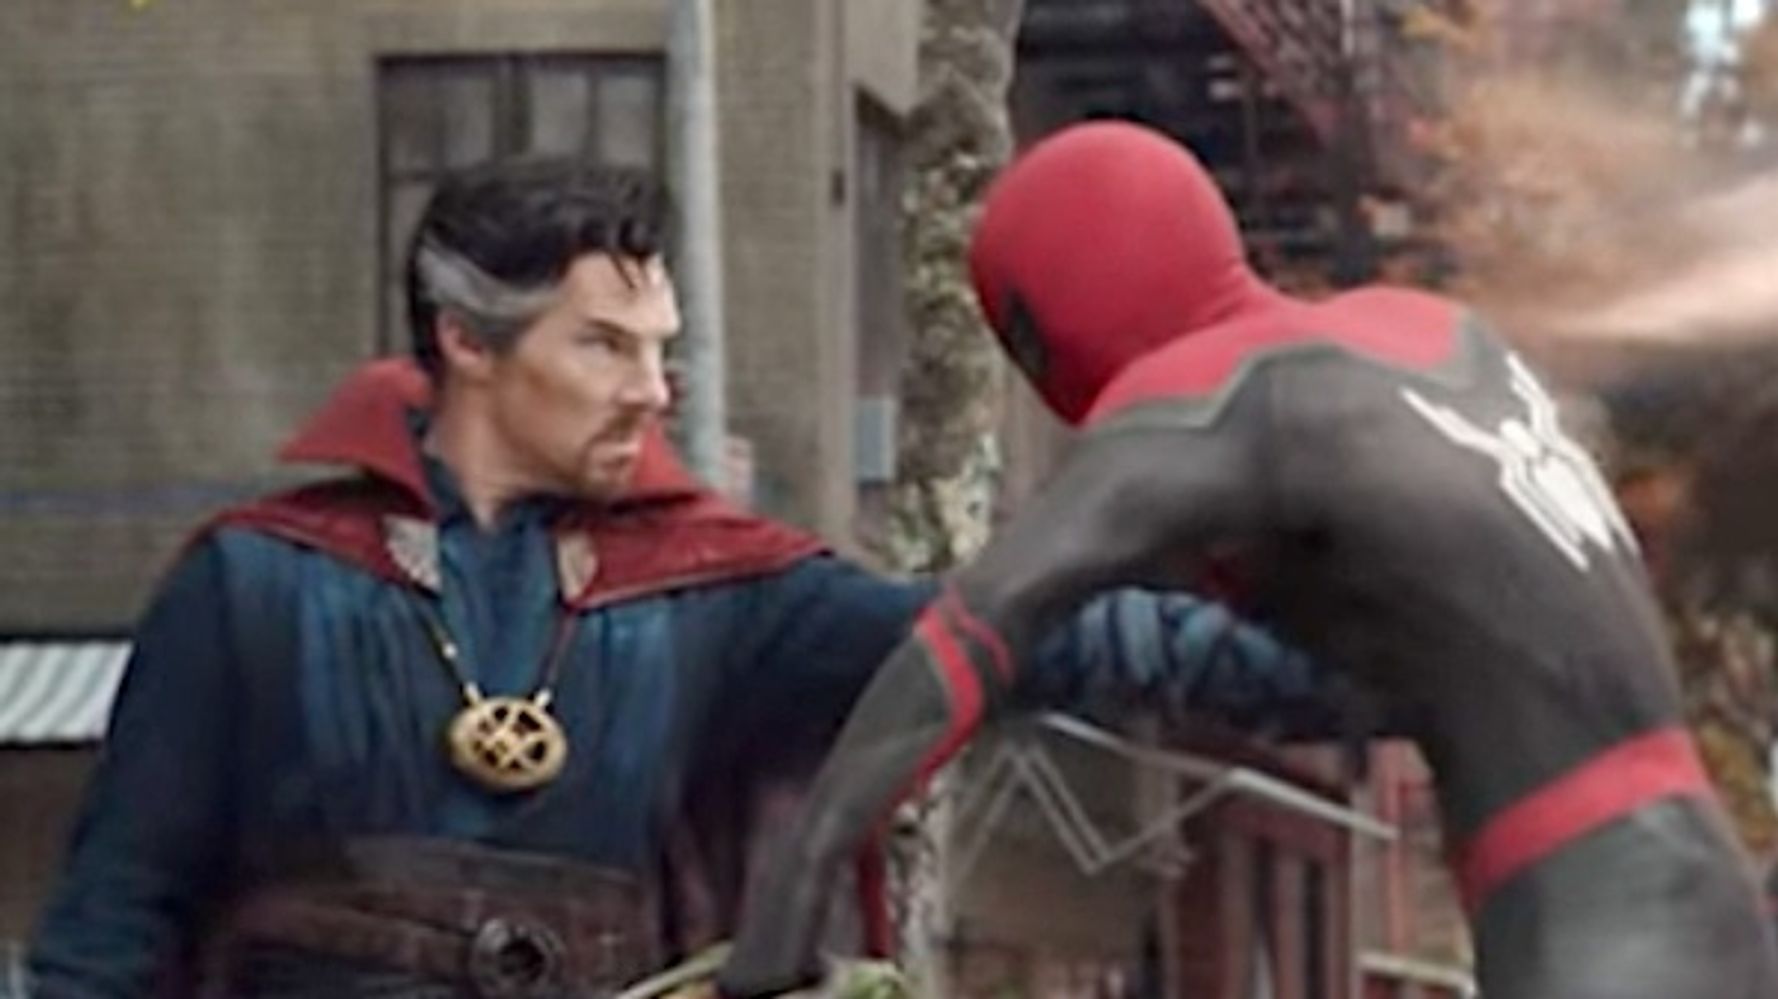 Strange New Spider-Man Trailer Drops And, Yes, Marvel Is Officially Going There